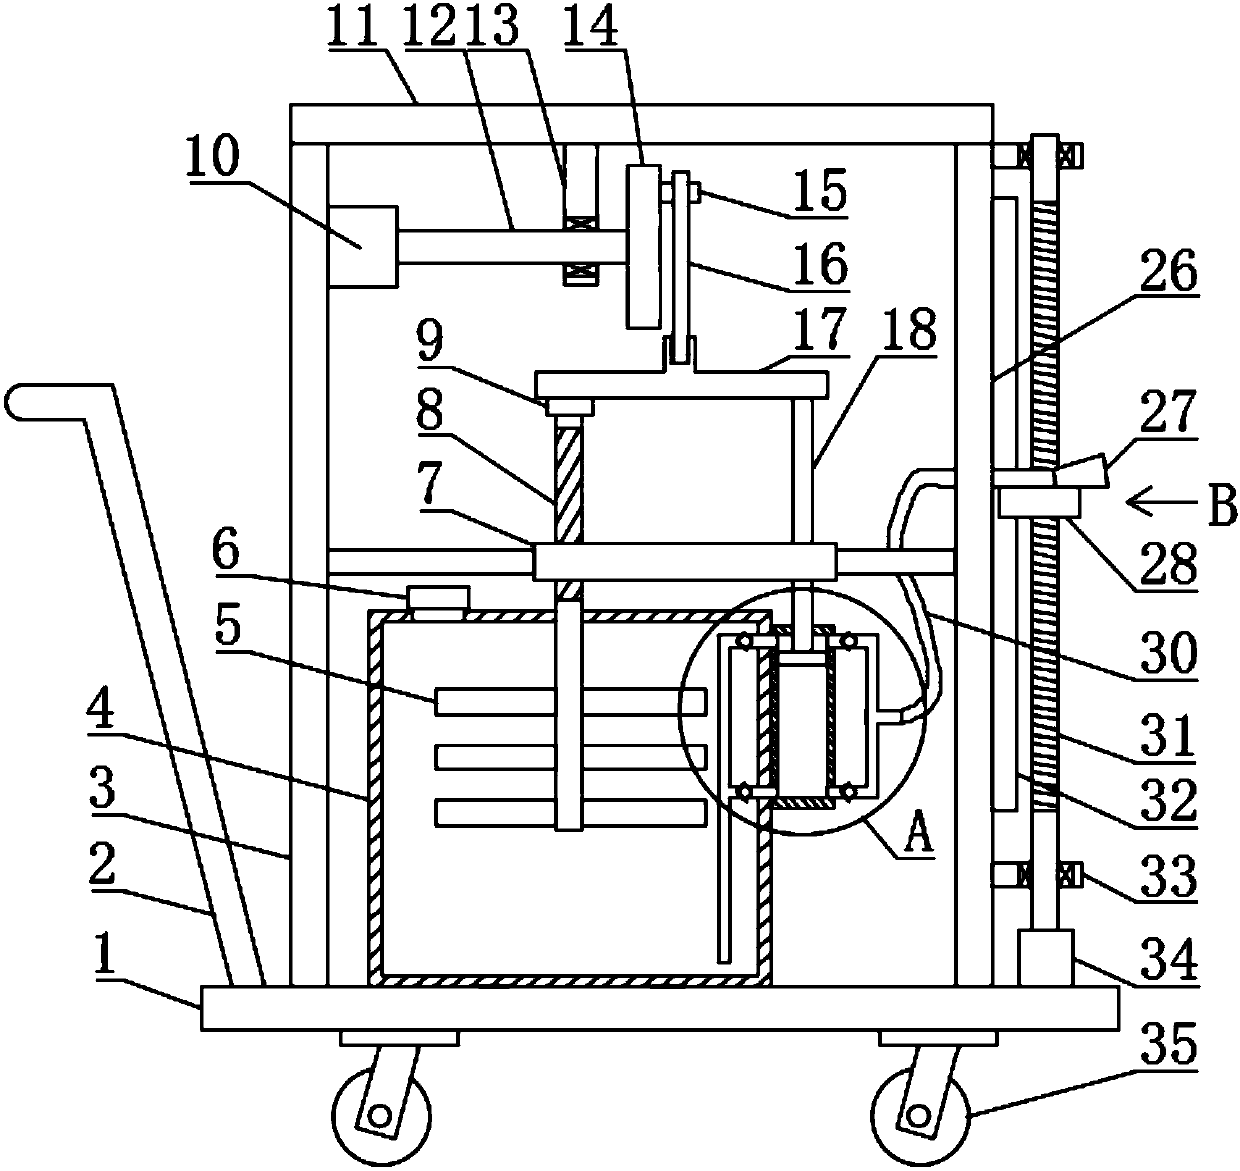 Spraying-height-adjustable pesticide mixing and spraying device